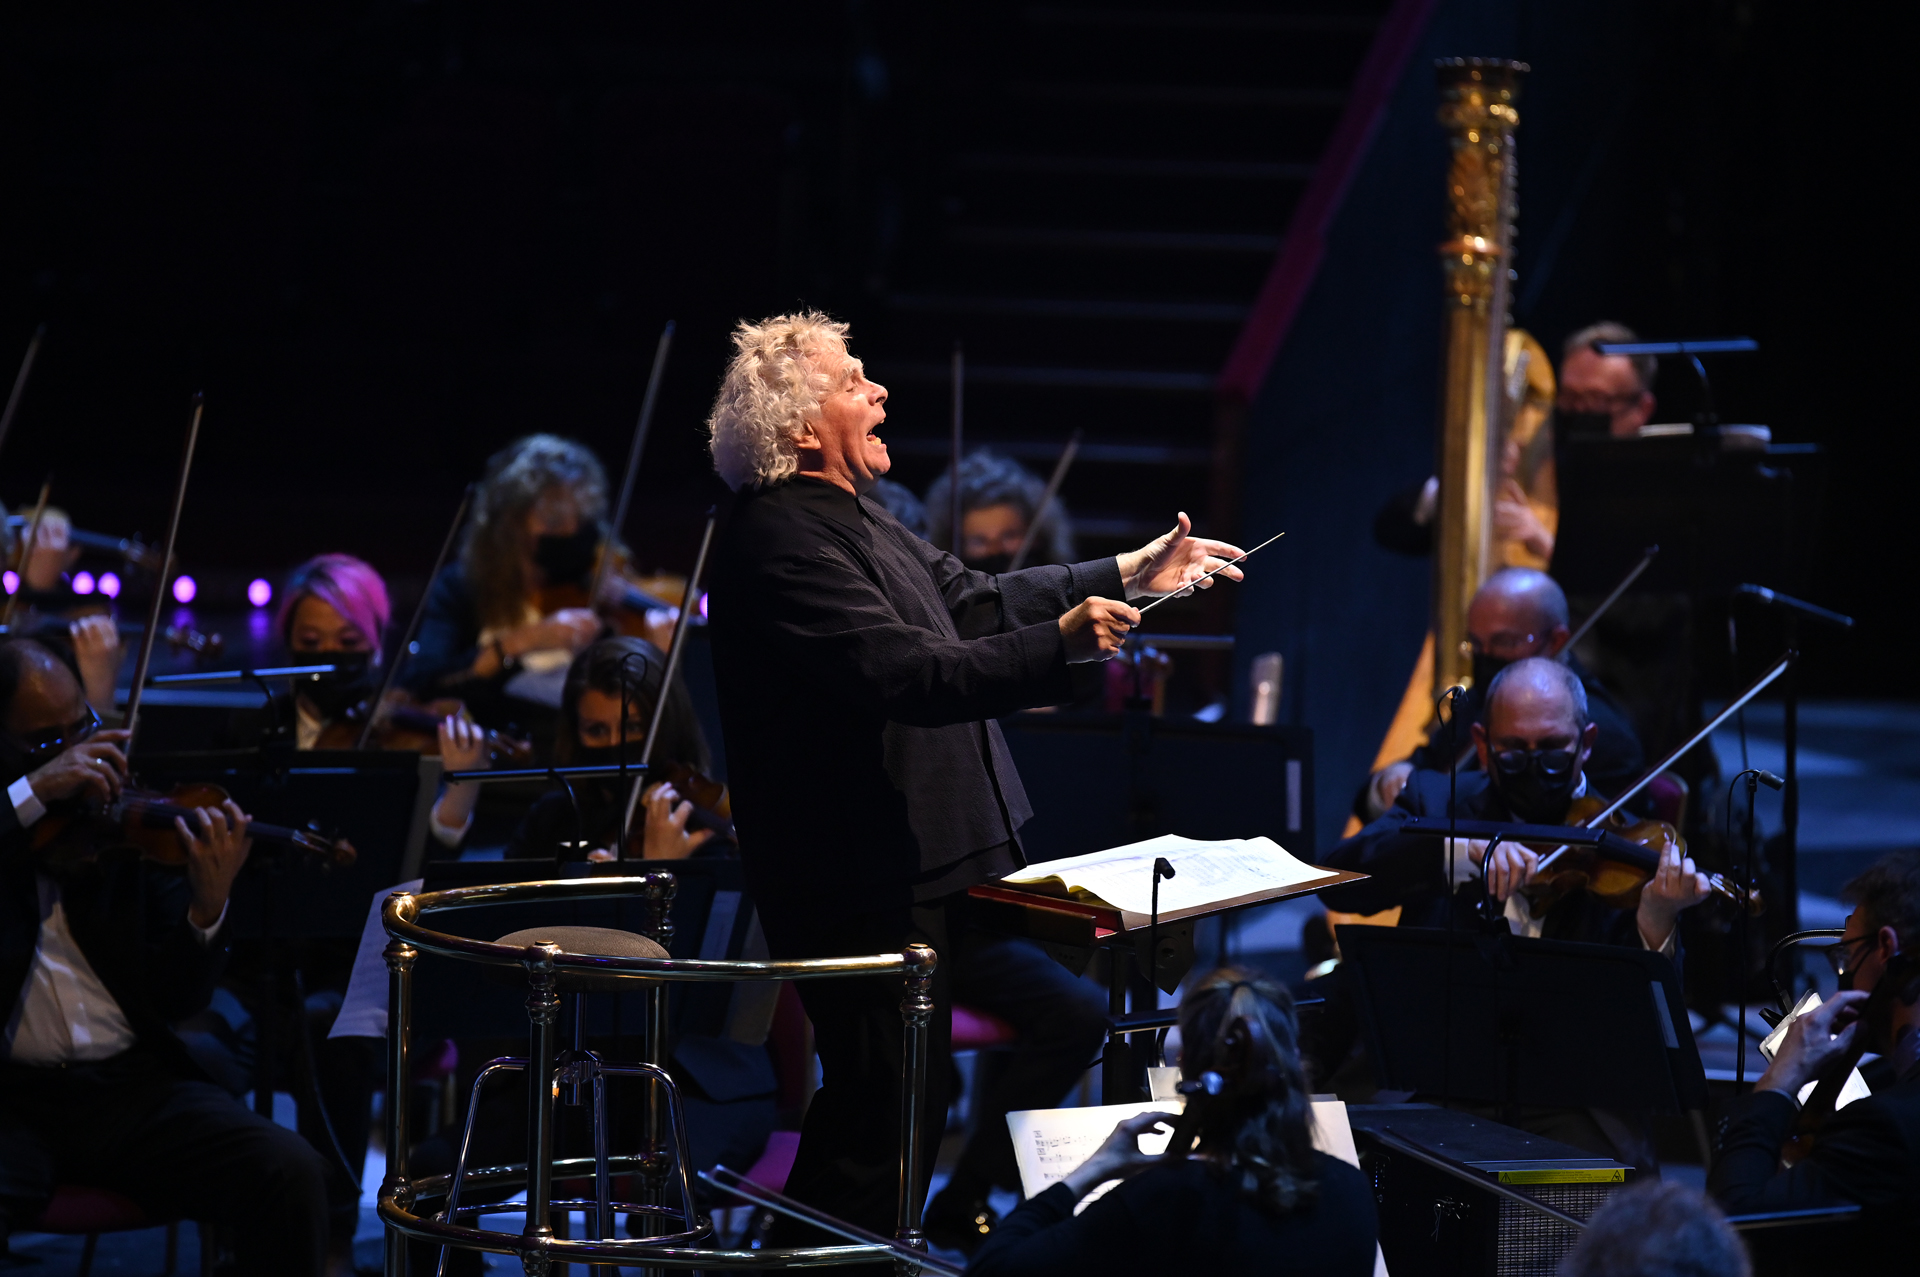 Simon Rattle conducts the LSO